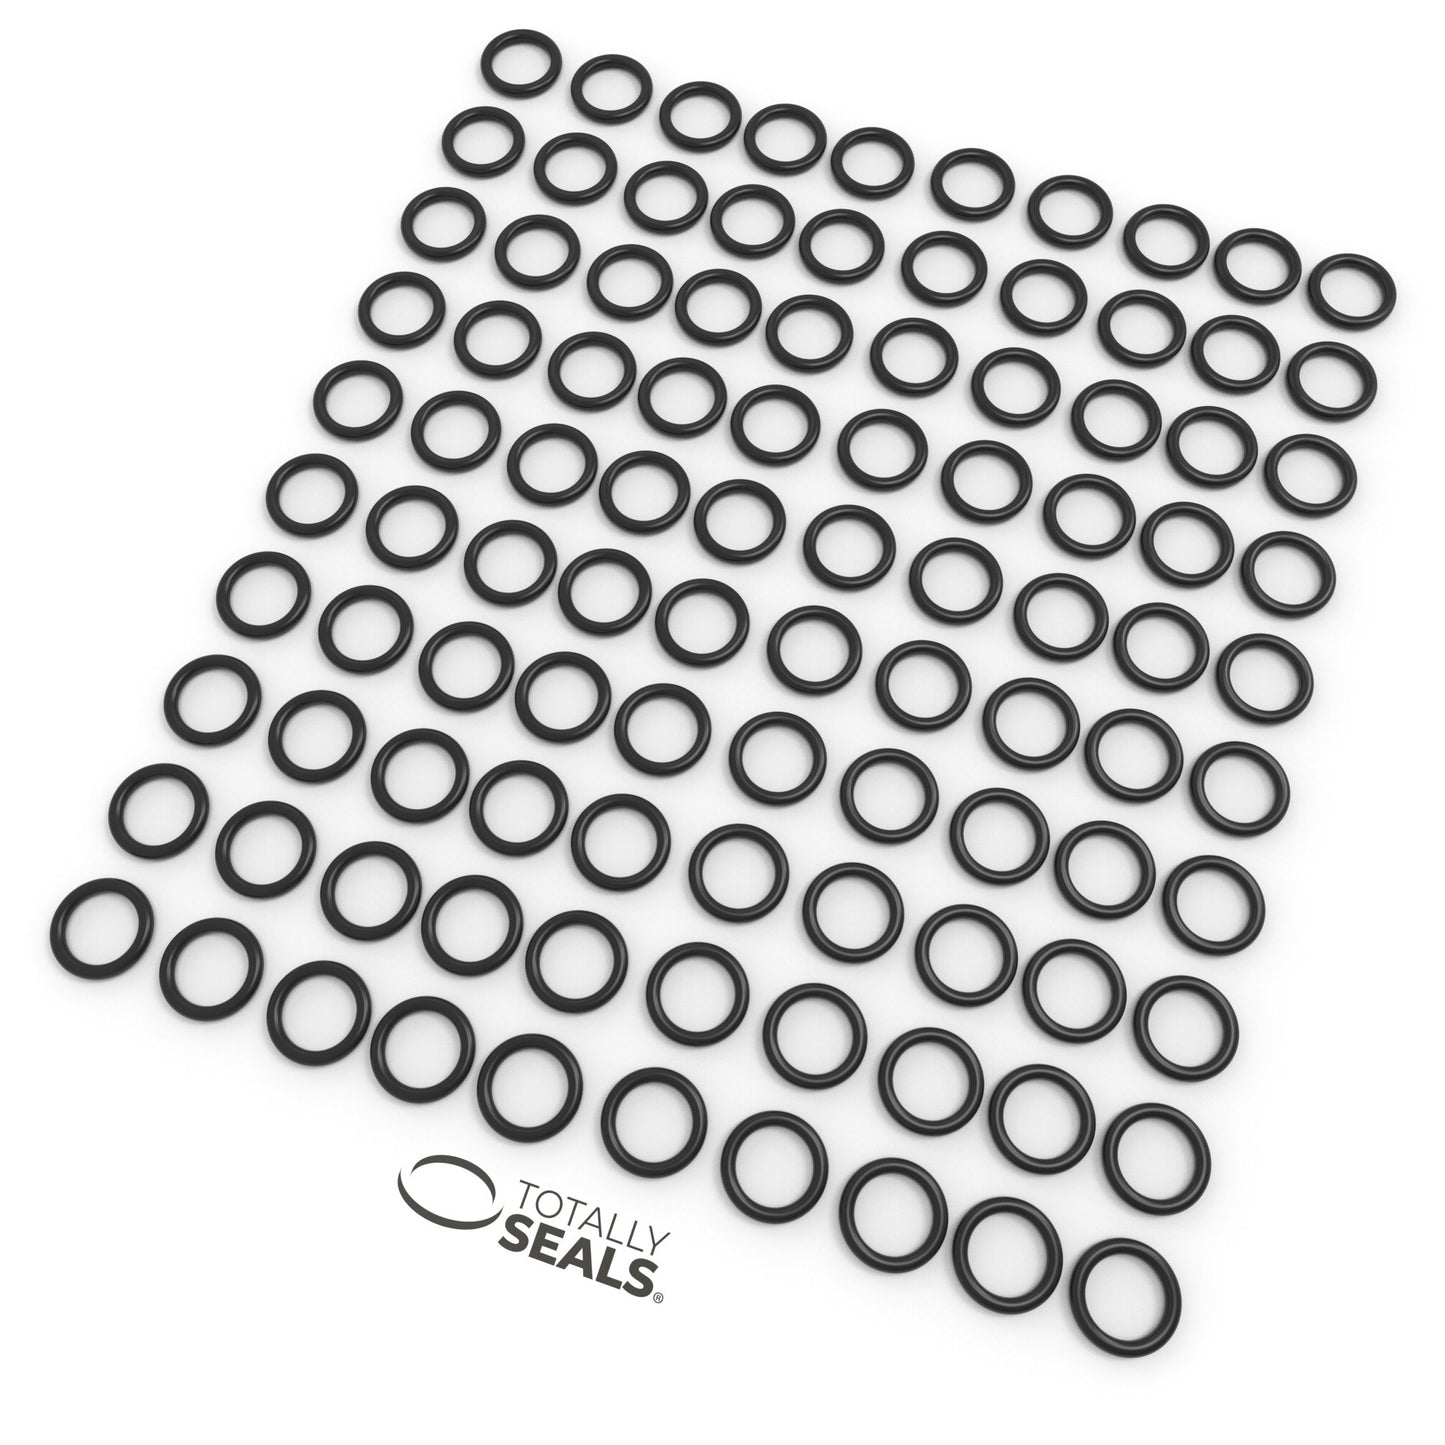 25mm x 2.5mm (30mm OD) Nitrile O-Rings - Totally Seals®